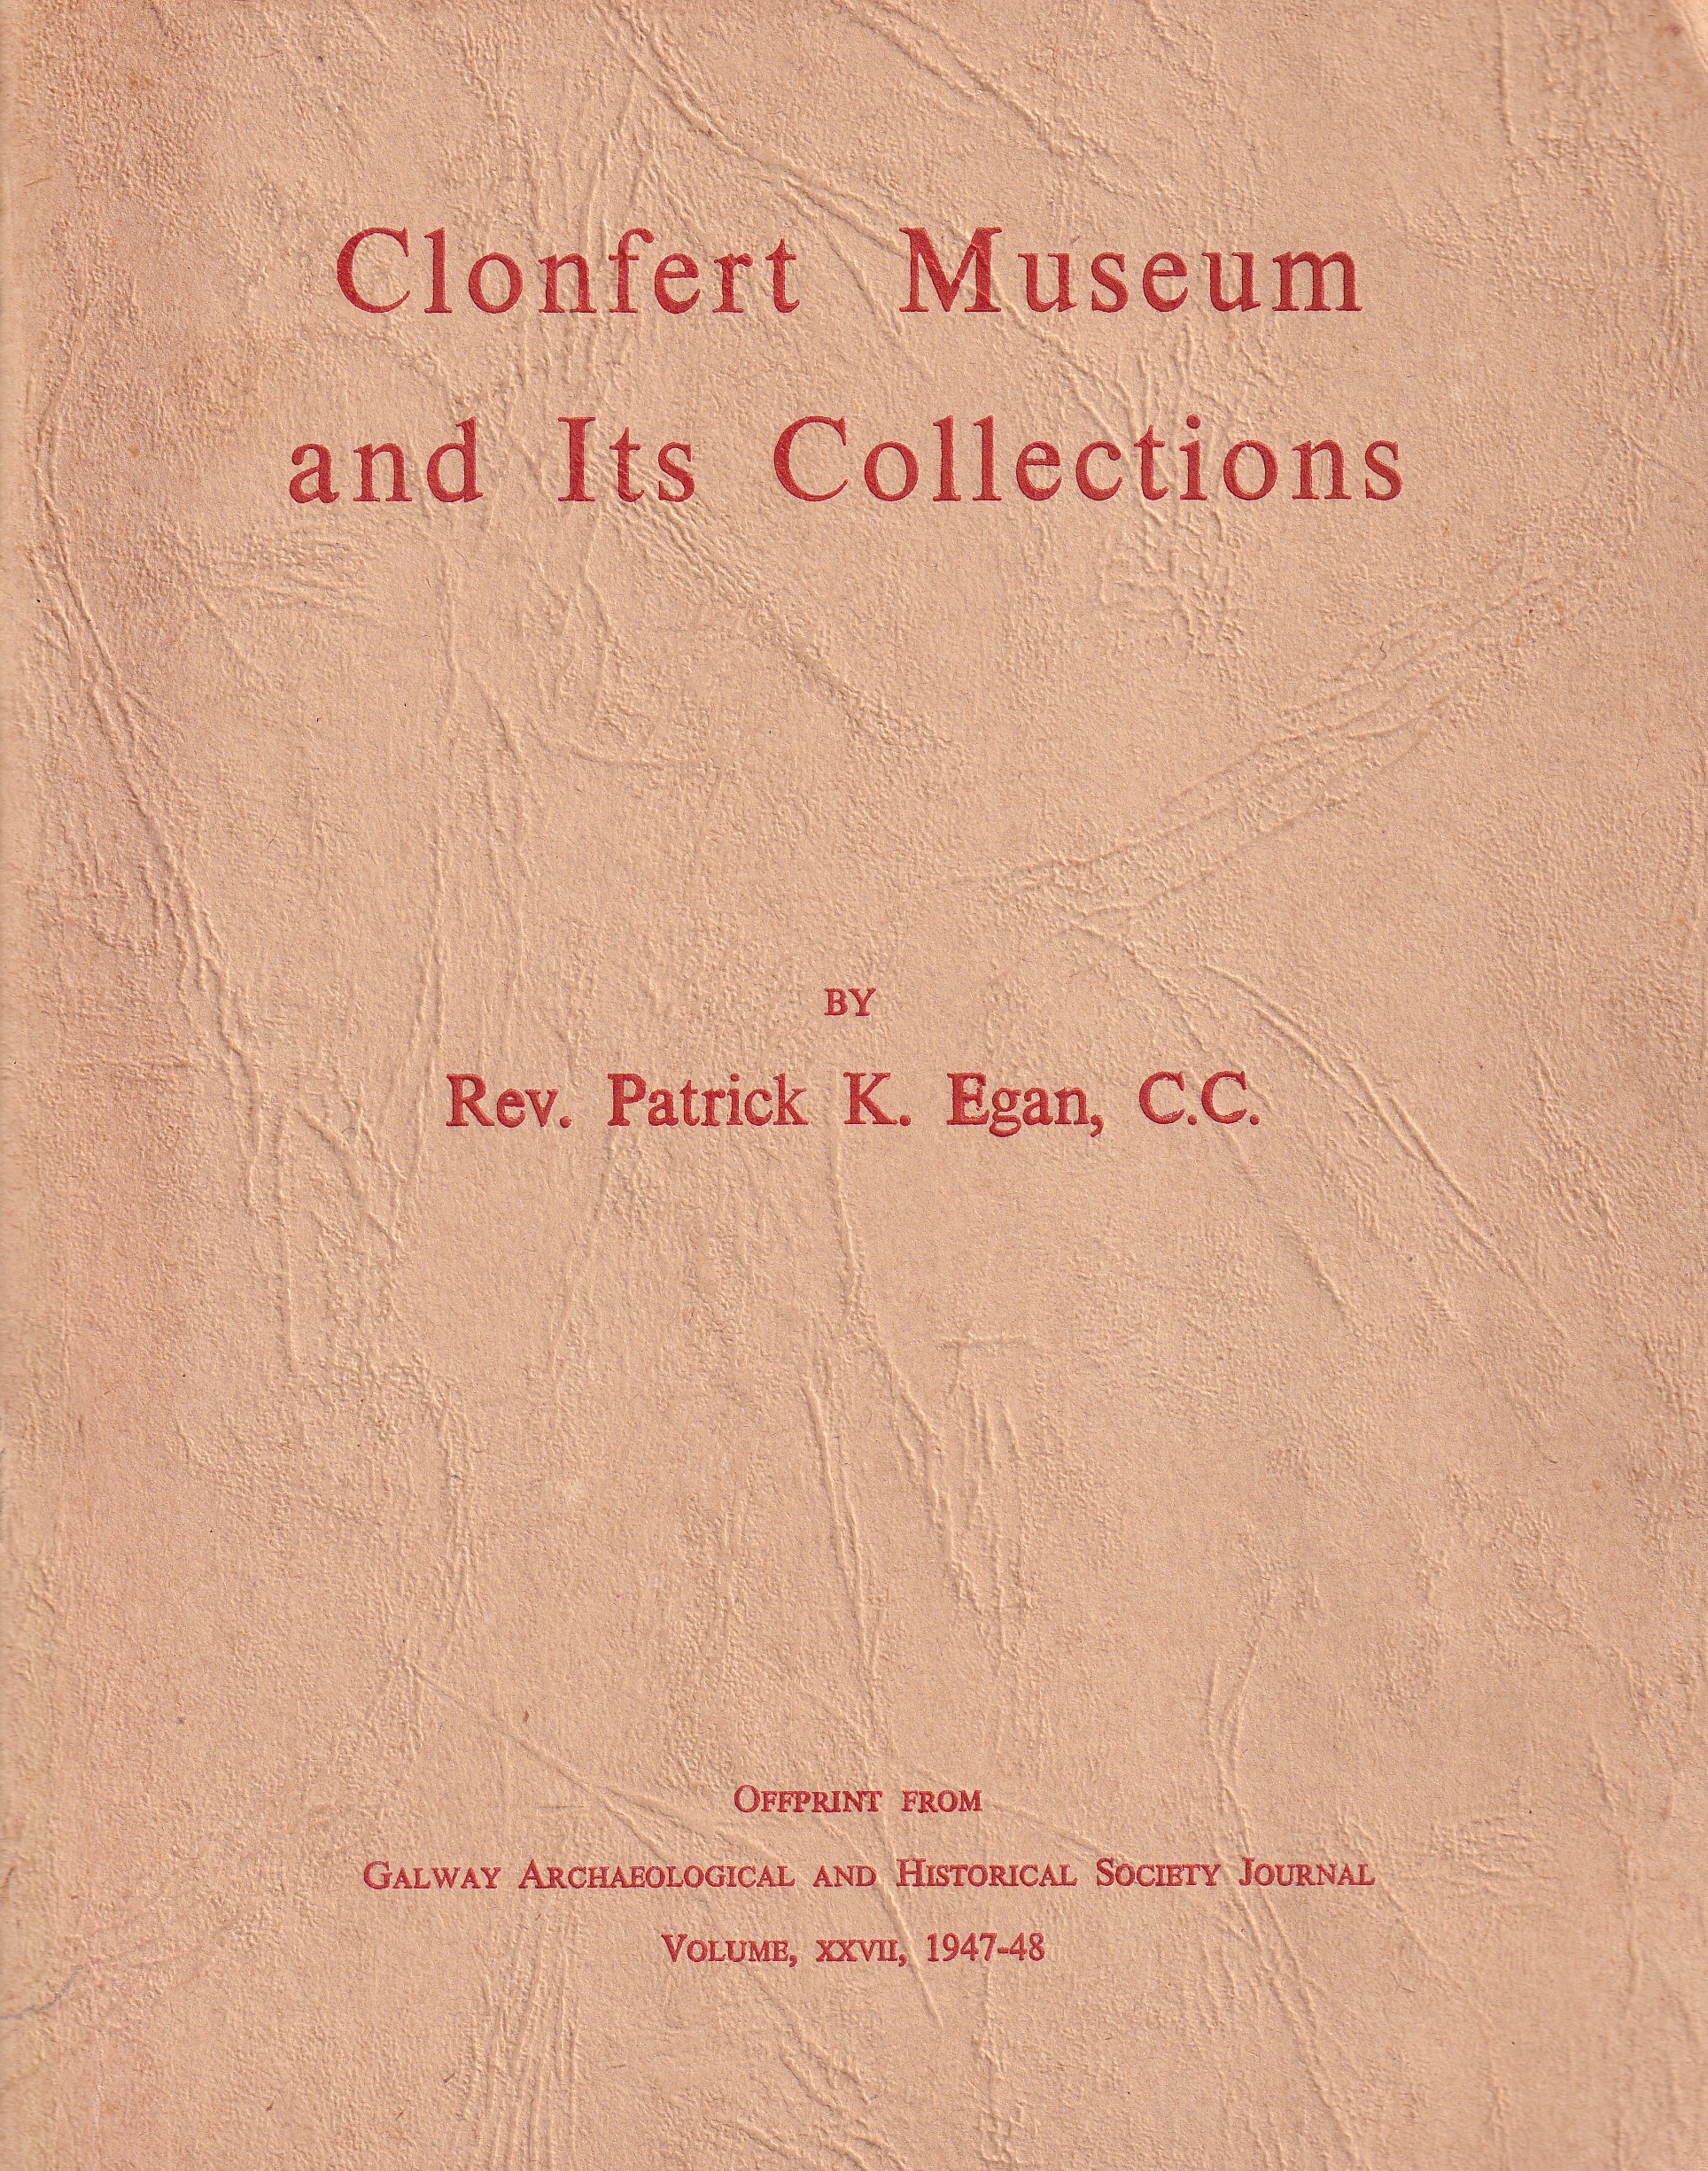 Clonfert Museum and Its Collections by Rev. Patrick K. Egan